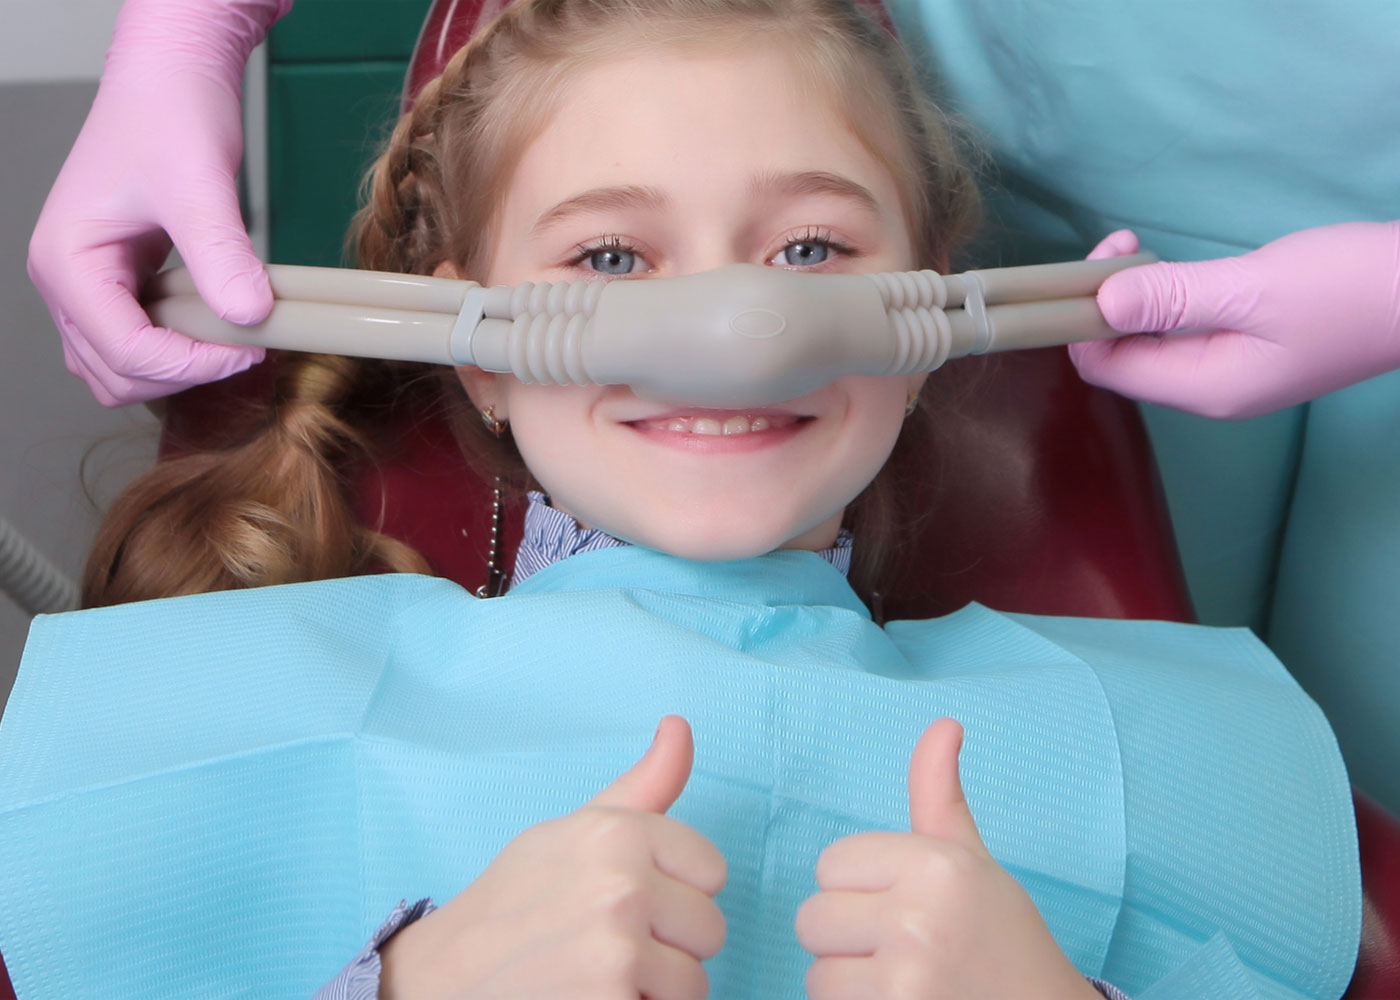 Preparing Your Child for Sedation - Guidance from Dental Experts